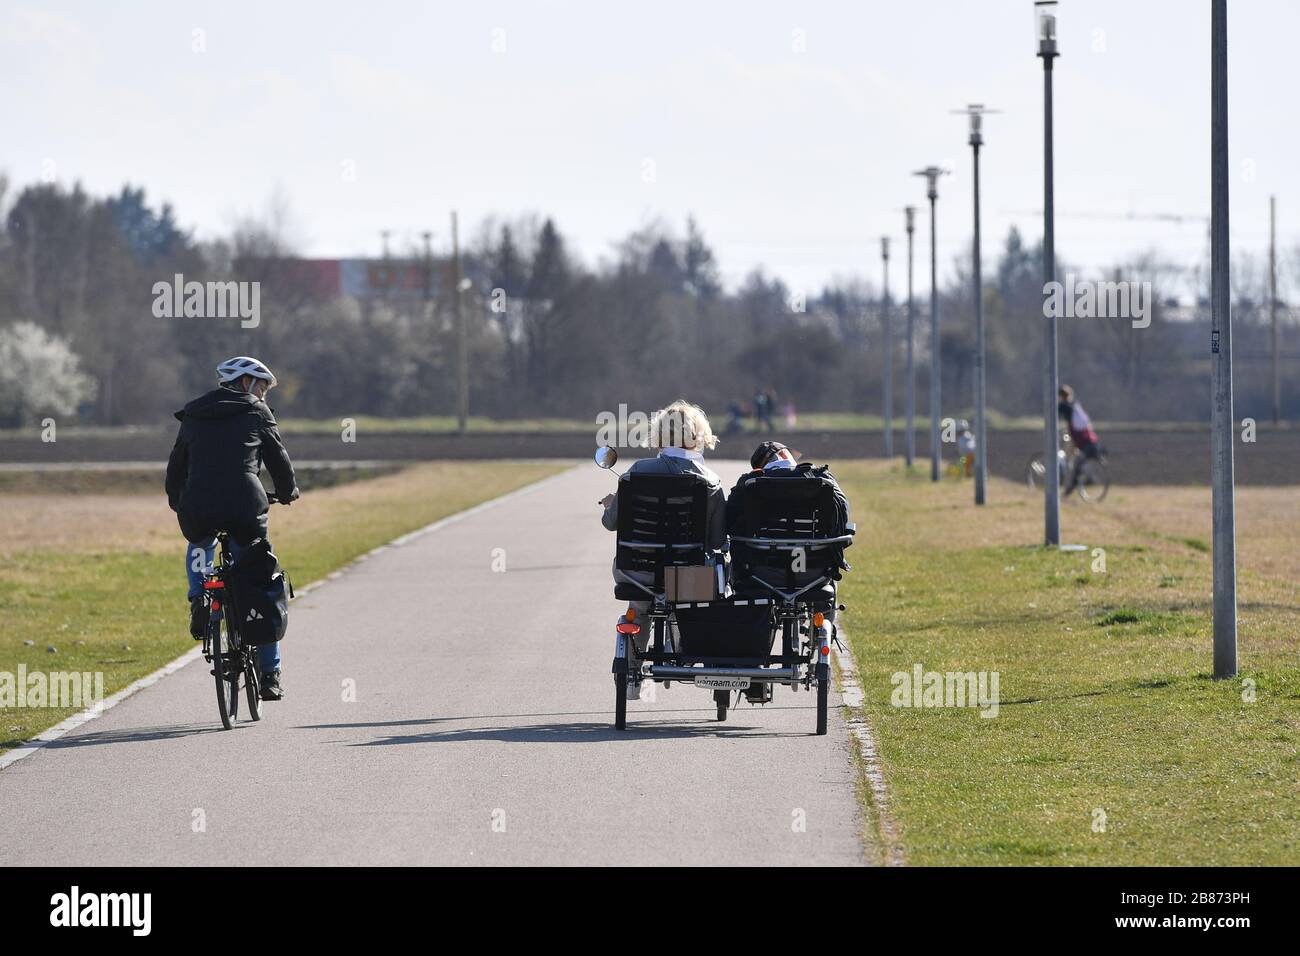 Munich, Deutschland. 18th Mar, 2020. Cyclists ride with a safe distance next to a tandem bicycle, which is occupied by two people, on an asphalt cycle path. ? Sven Simon Fotoagentur GmbH & Co. Press Photo KG # Prinzess-Luise-Str. 41 # 45479 M uelheim/R uhr # Tel. 0208/9413250 # Fax. 0208/9413260 # GLS Bank # BLZ 430 609 67 # Kto. 4030 025 100 # IBAN DE75 4306 0967 4030 0251 00 # BIC GENODEM1GLS # www.svensimon.net. | usage worldwide Credit: dpa/Alamy Live News Stock Photo